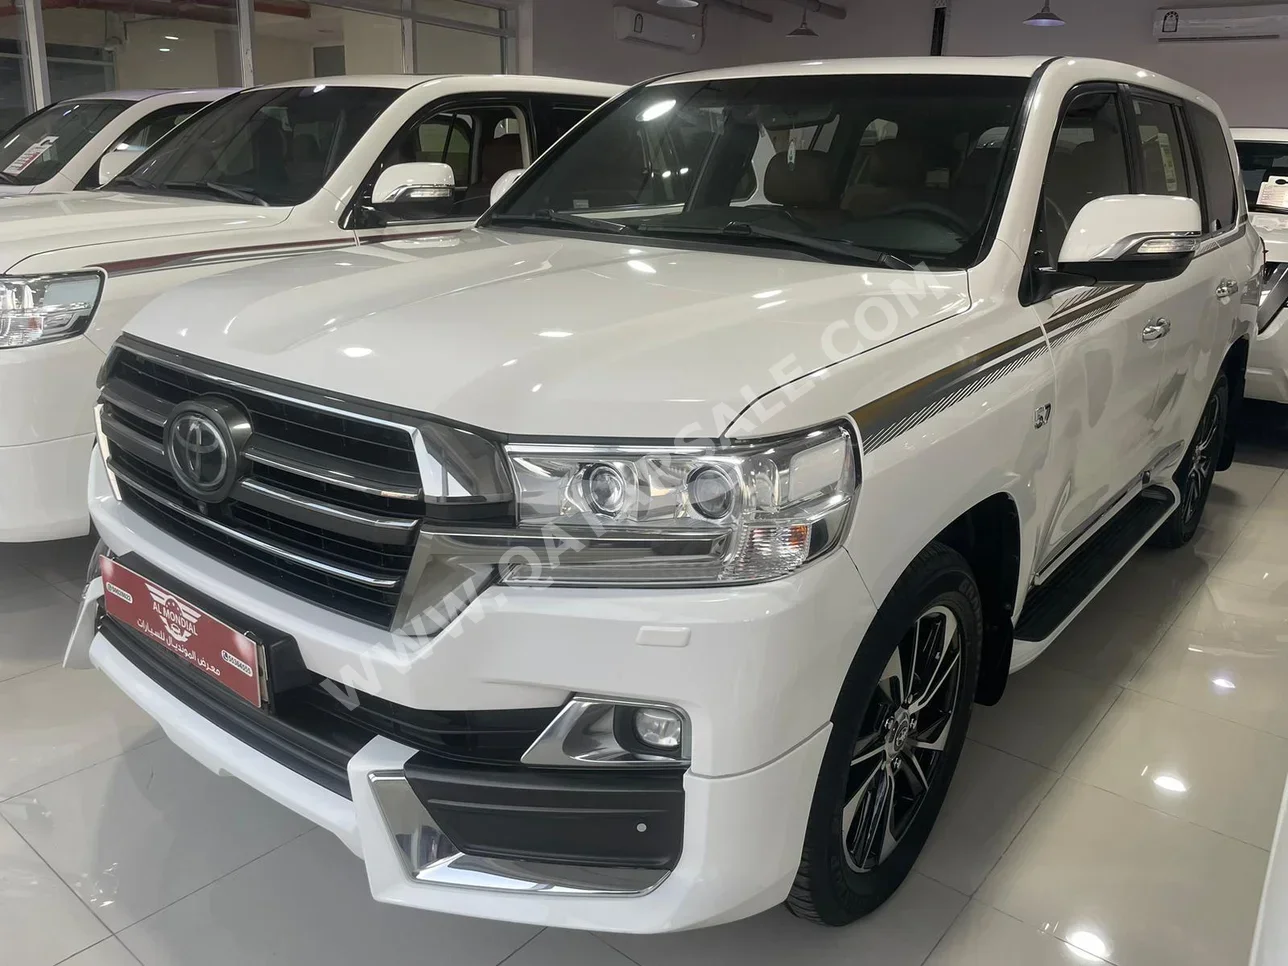 Toyota  Land Cruiser  VXR- Grand Touring S  2020  Automatic  208,000 Km  8 Cylinder  Four Wheel Drive (4WD)  SUV  White